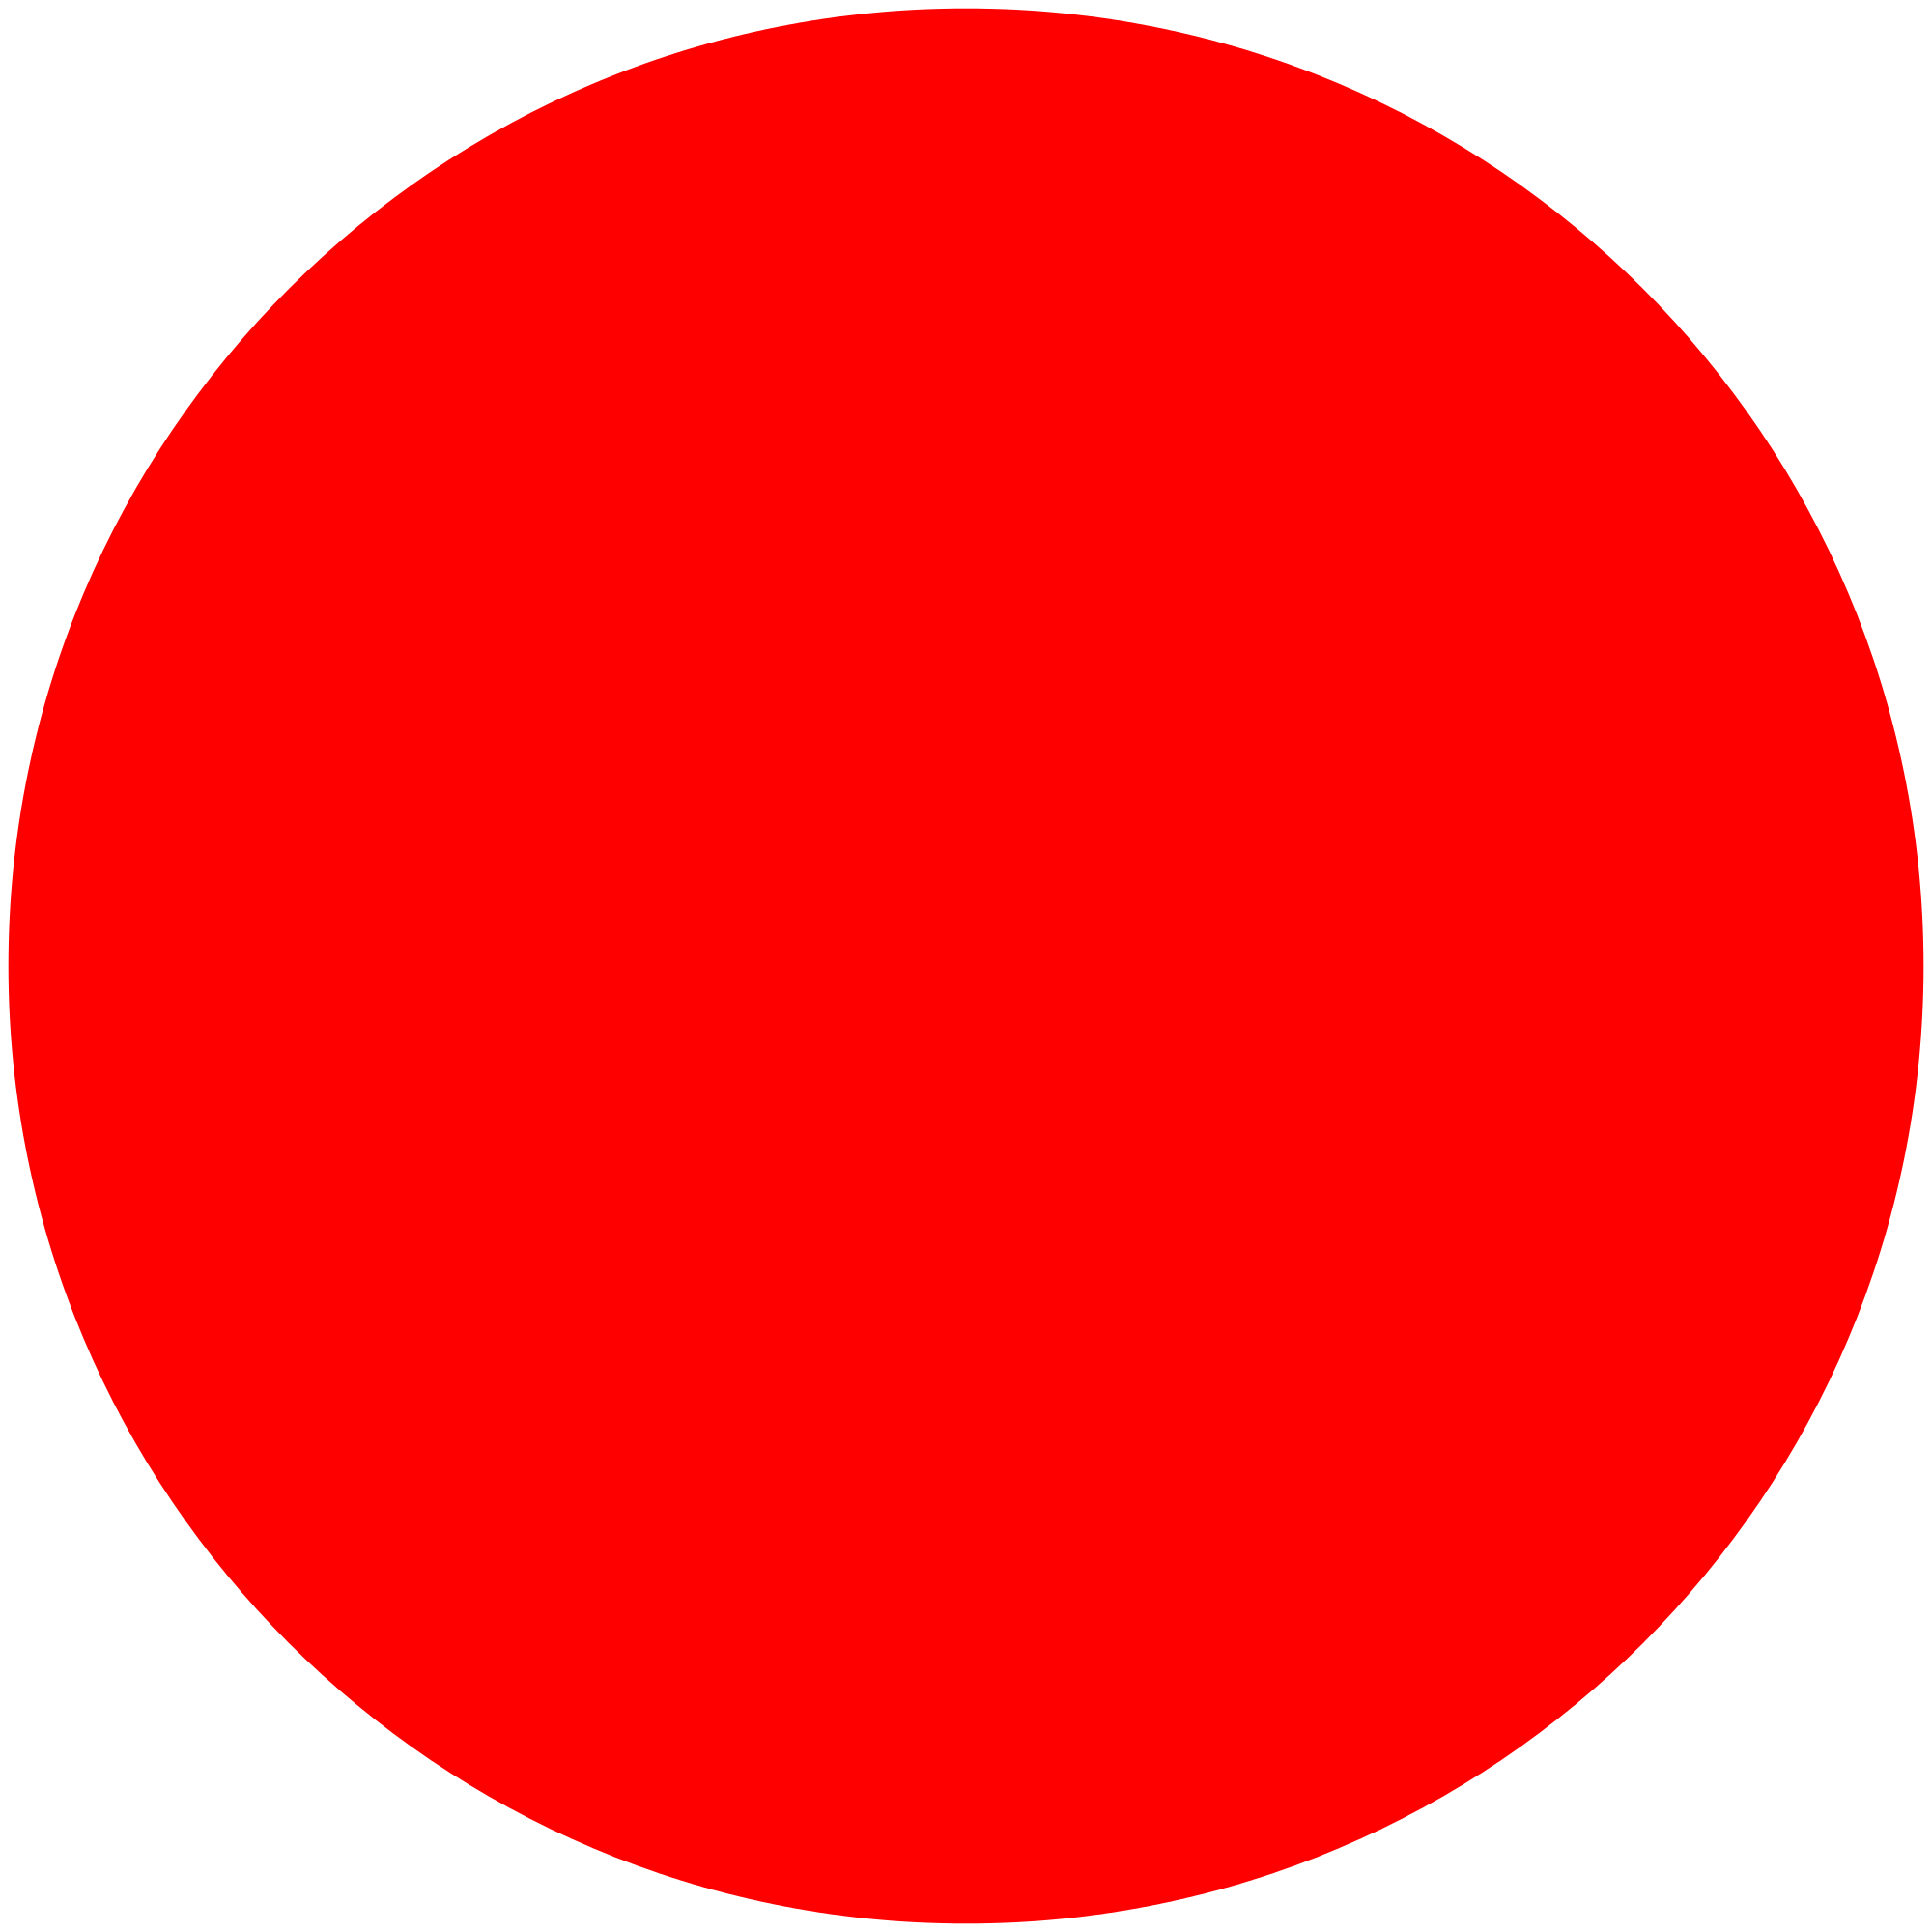 File:Small red circle.png - Wikimedia Commons